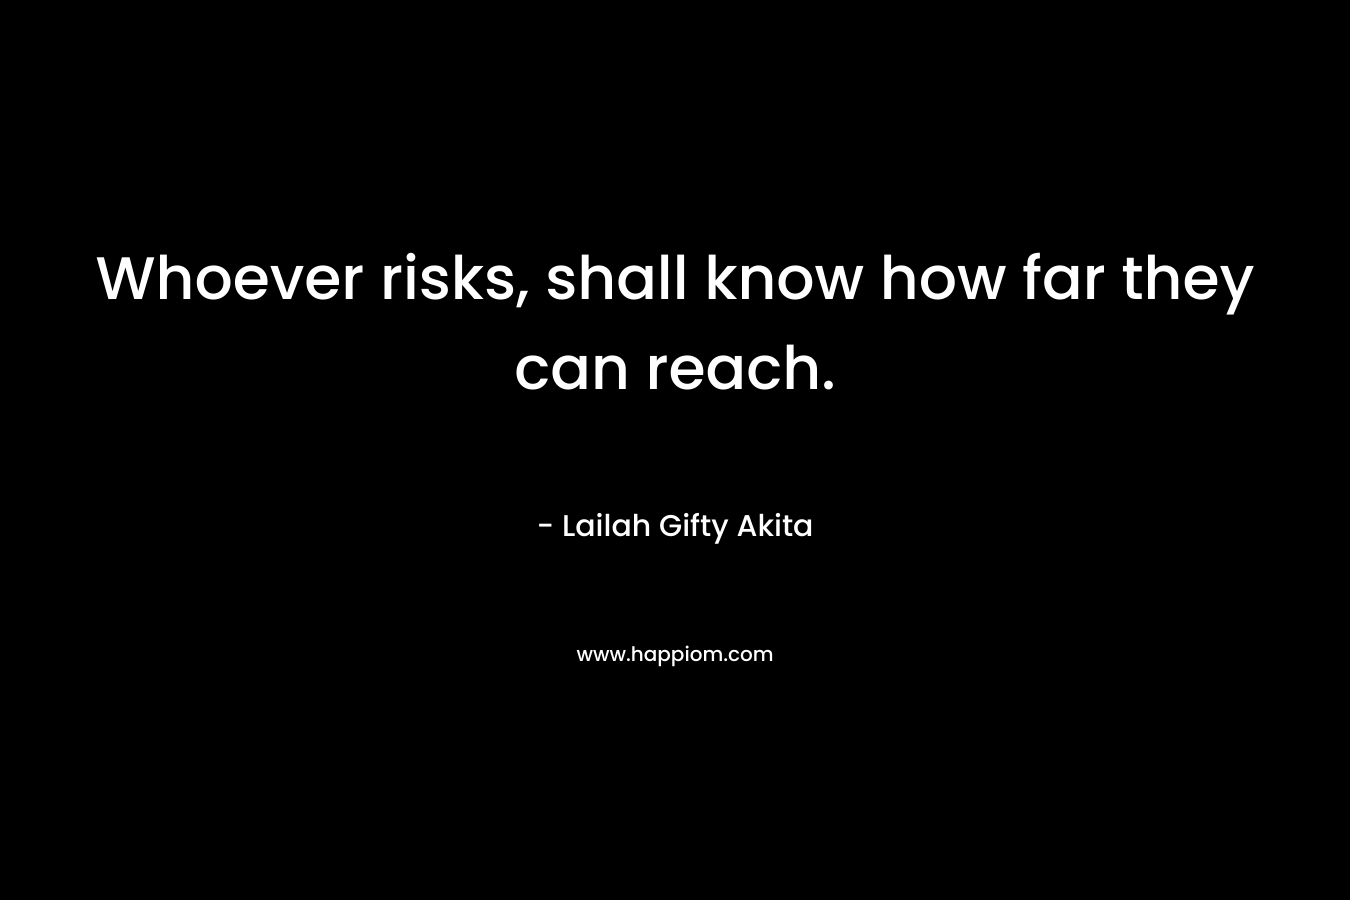 Whoever risks, shall know how far they can reach.